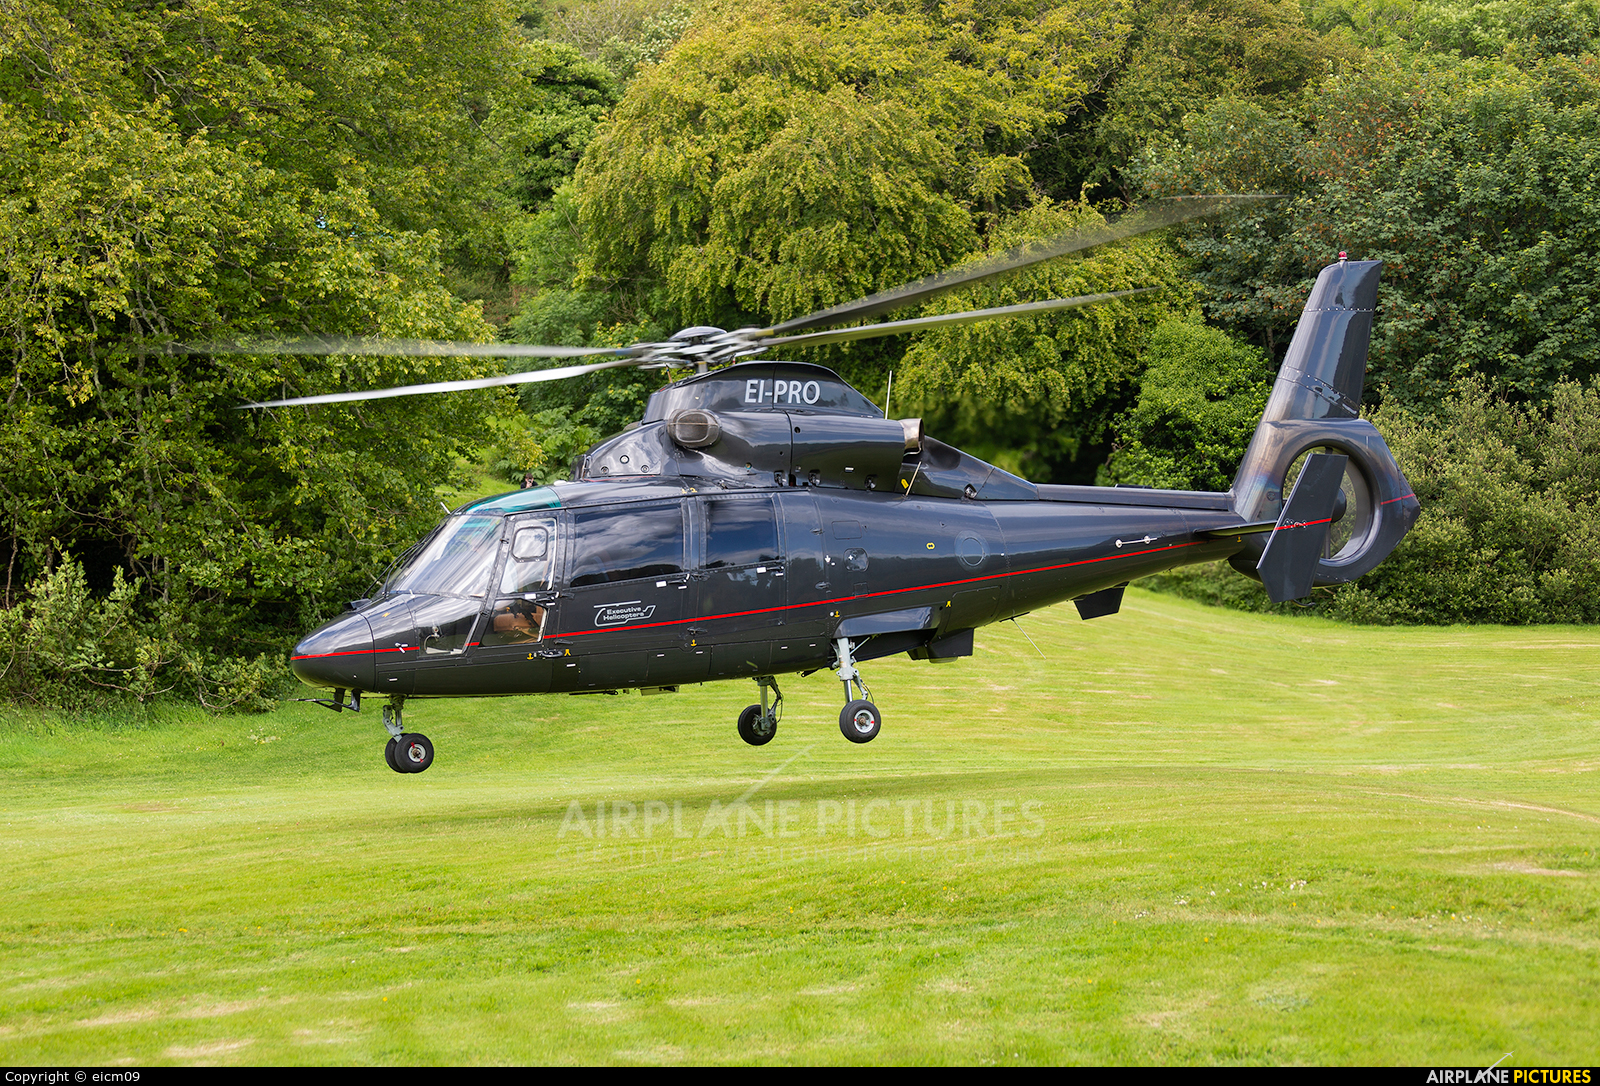 Executive Helicopters EI-PRO aircraft at Clifden